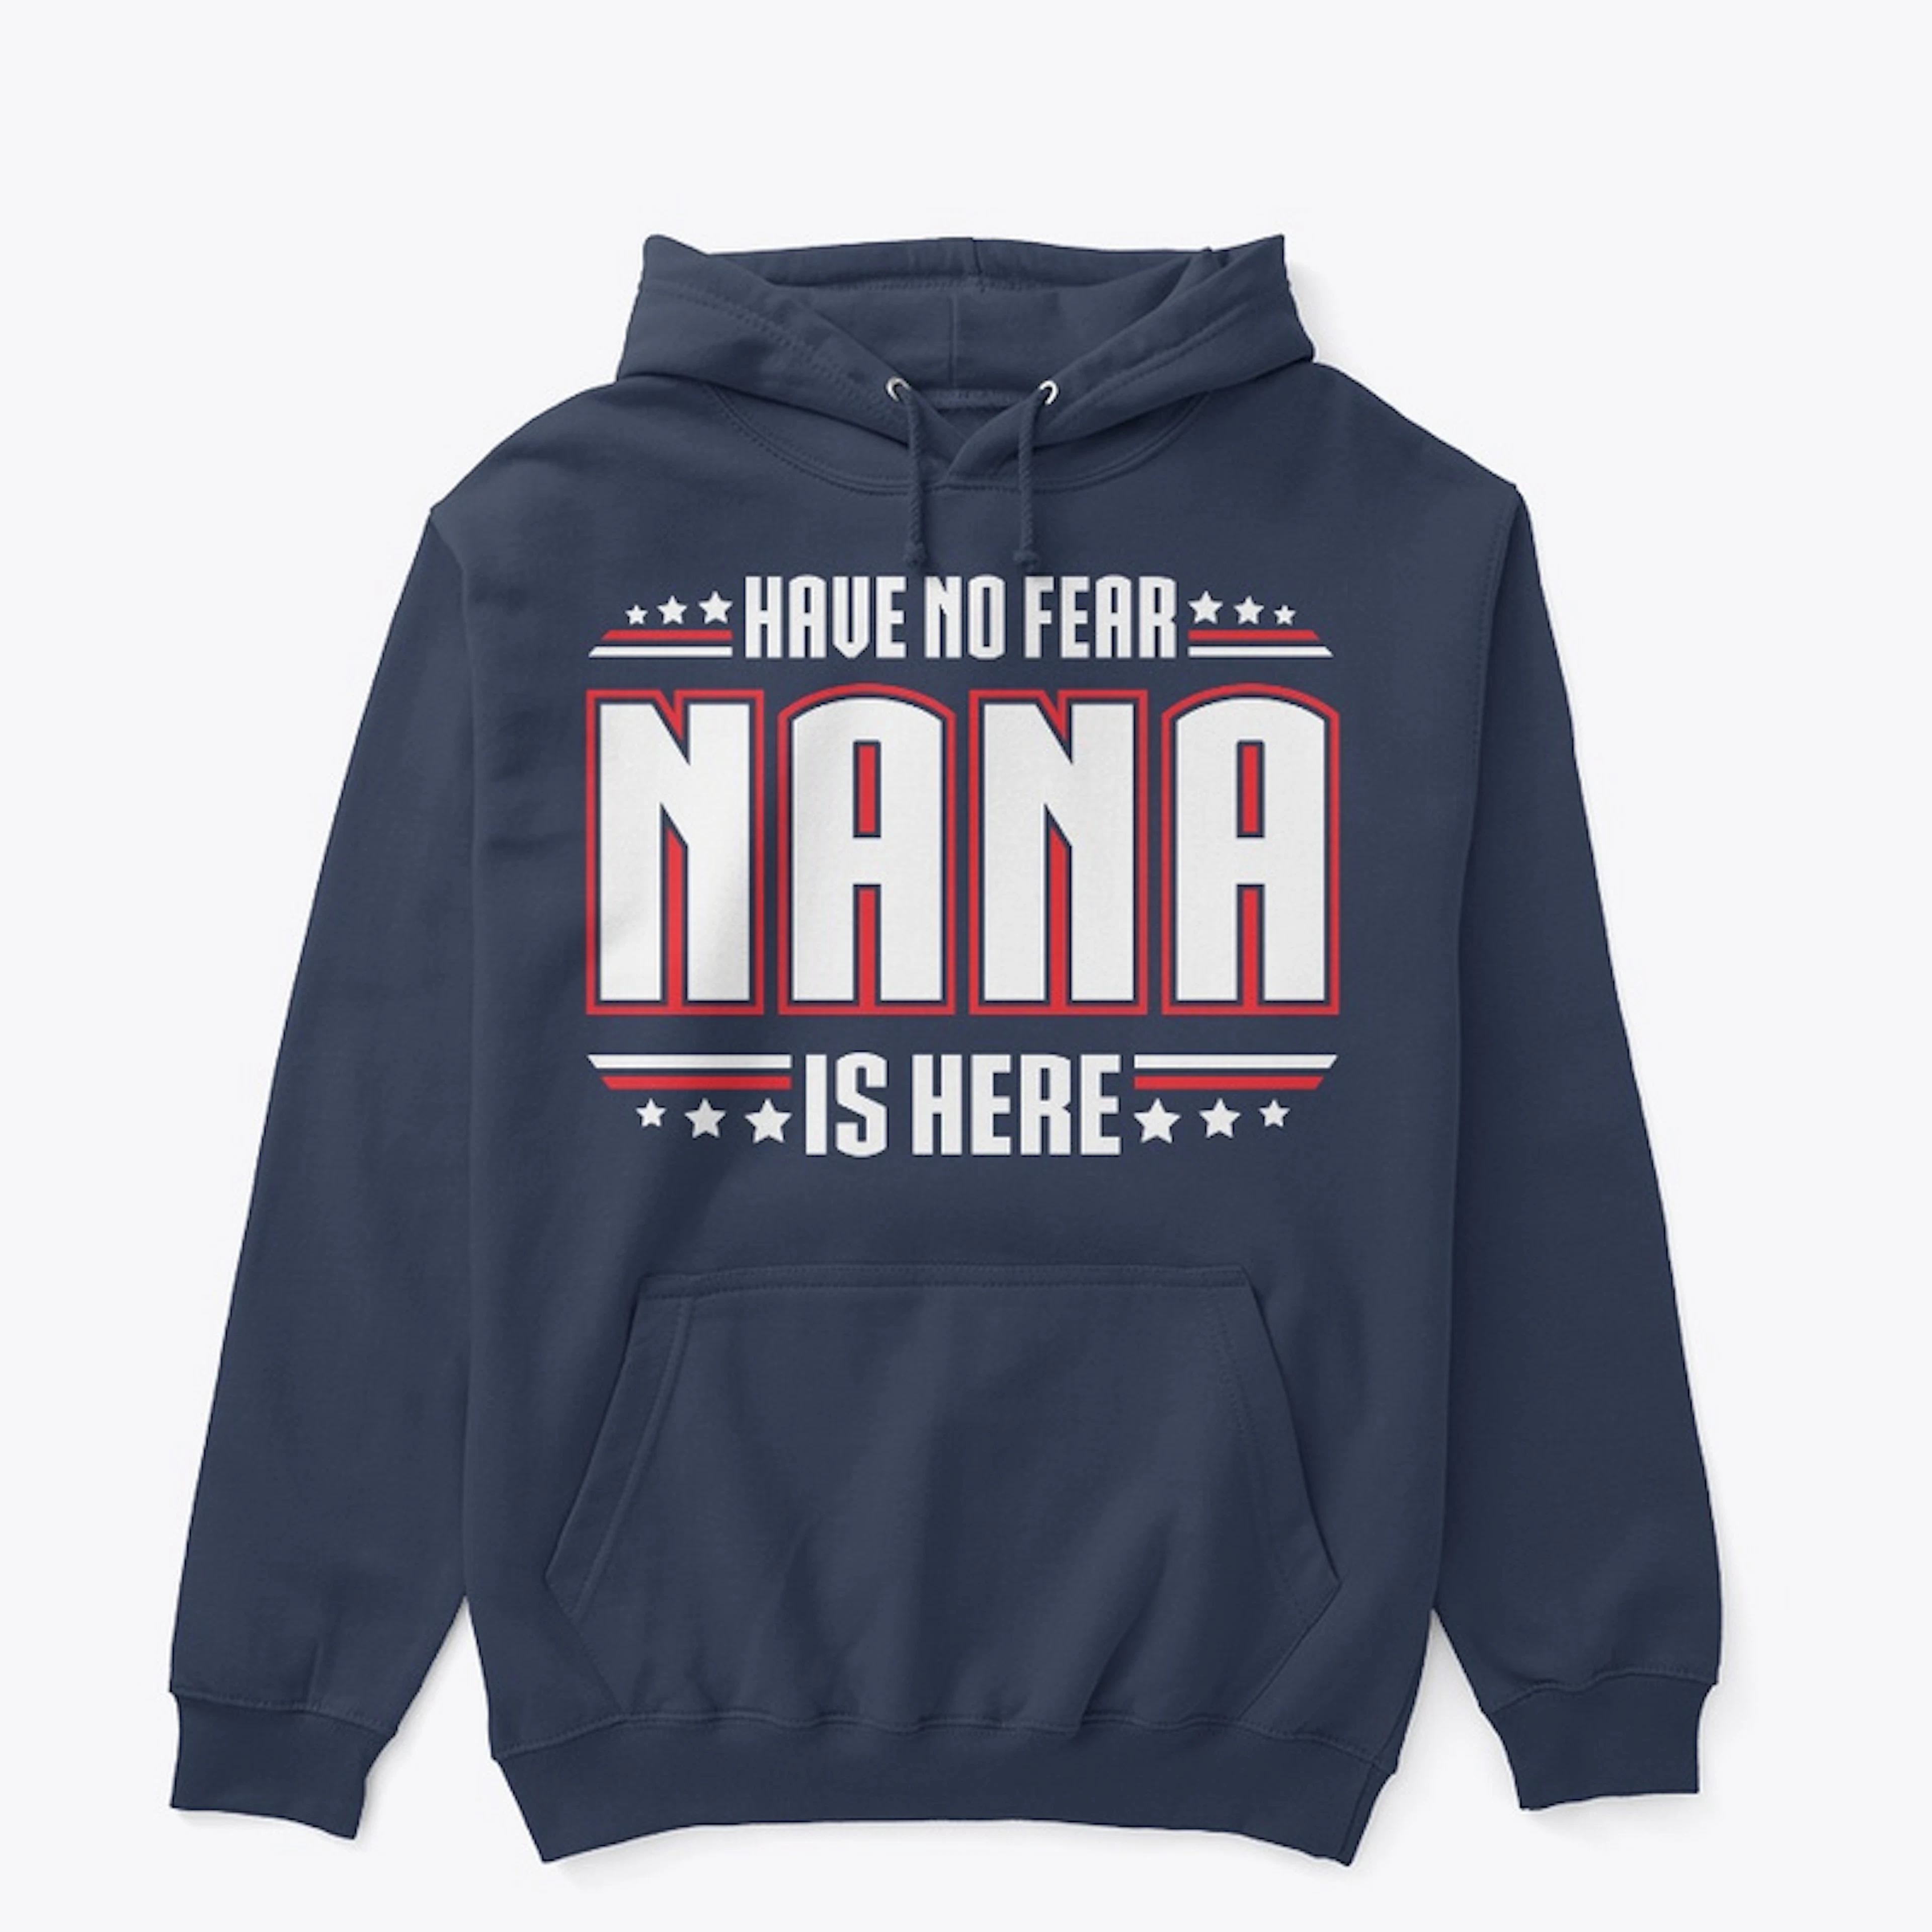 Have No Fear NANA is Here!